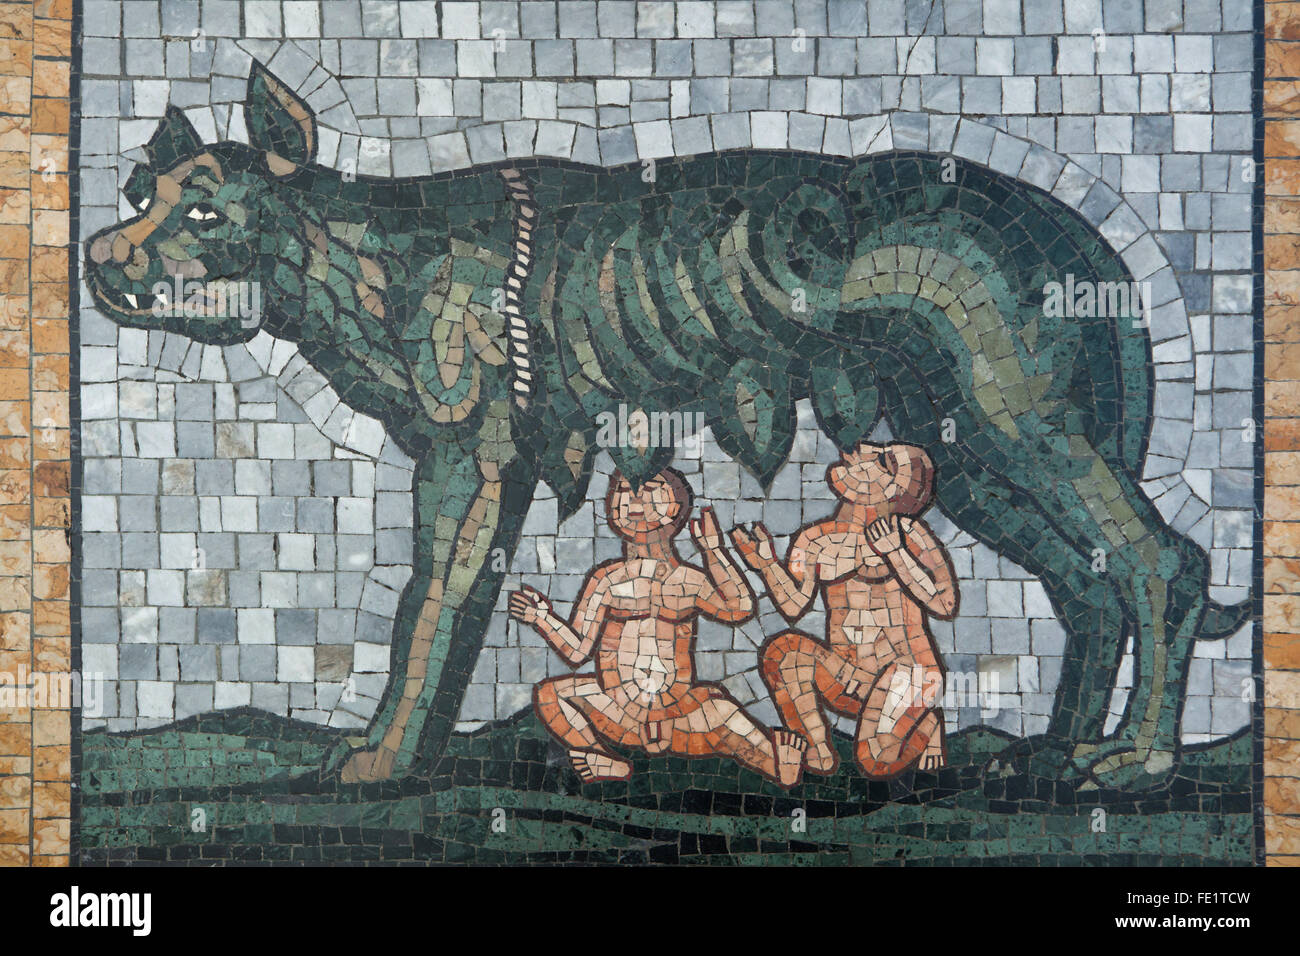 Capitoline Wolf depicted on the mosaic floor in the Galleria Vittorio Emanuele II in Milan, Lombardy, Italy. Stock Photo